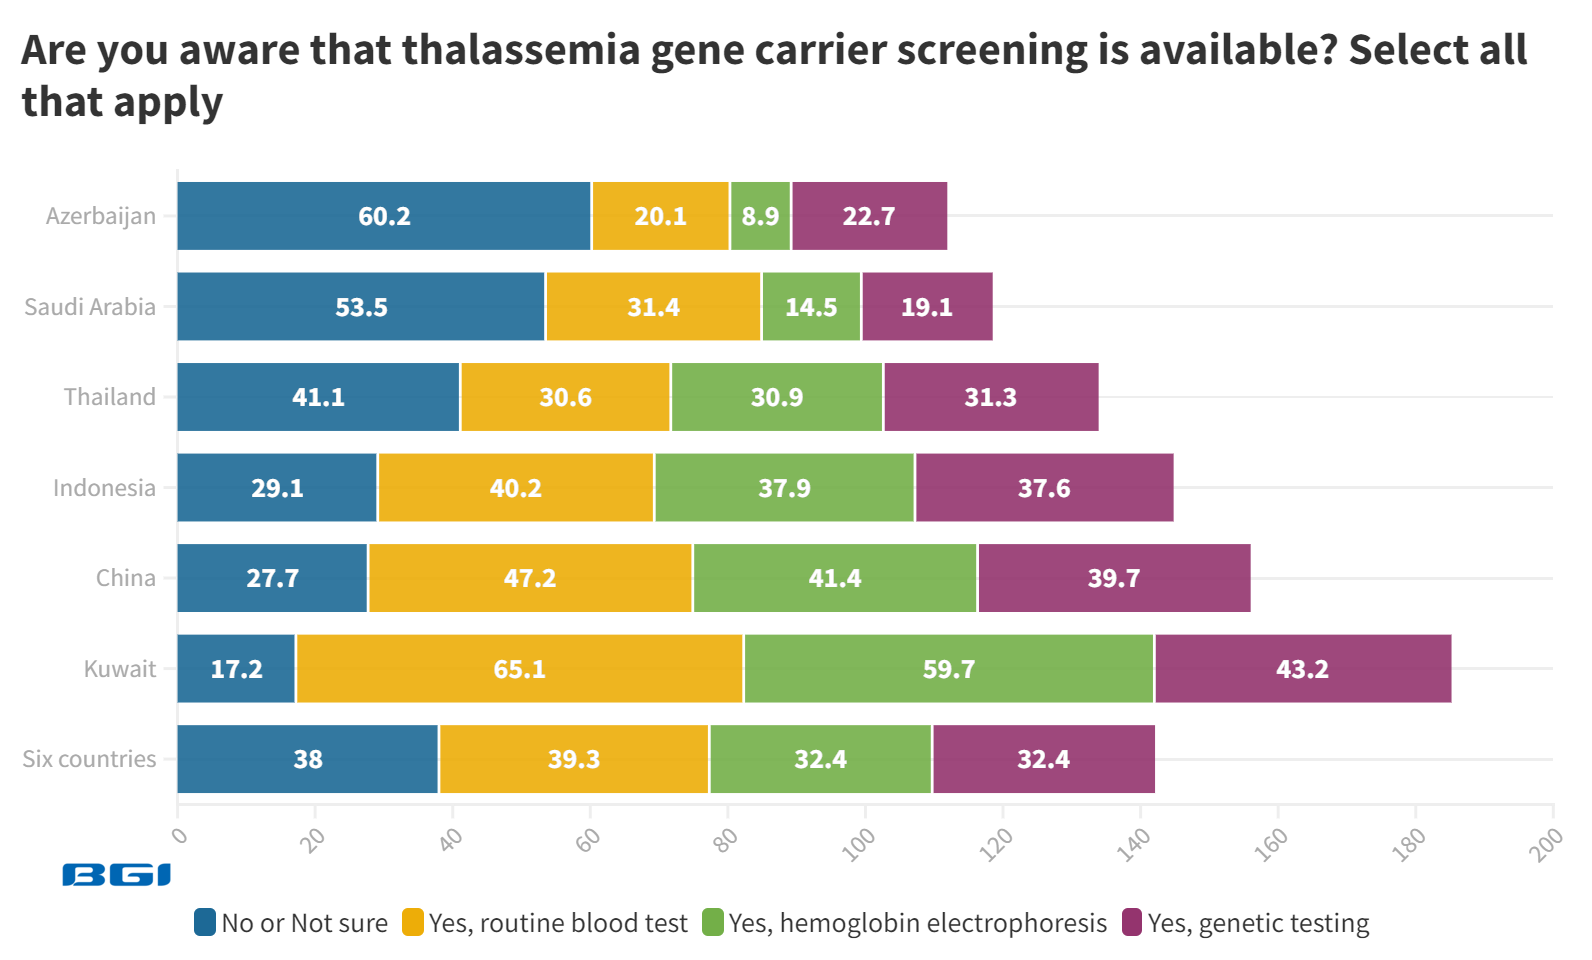 Are+you+aware+that+thalassemia+gene+carrier+screening+is+available_++%402x.png